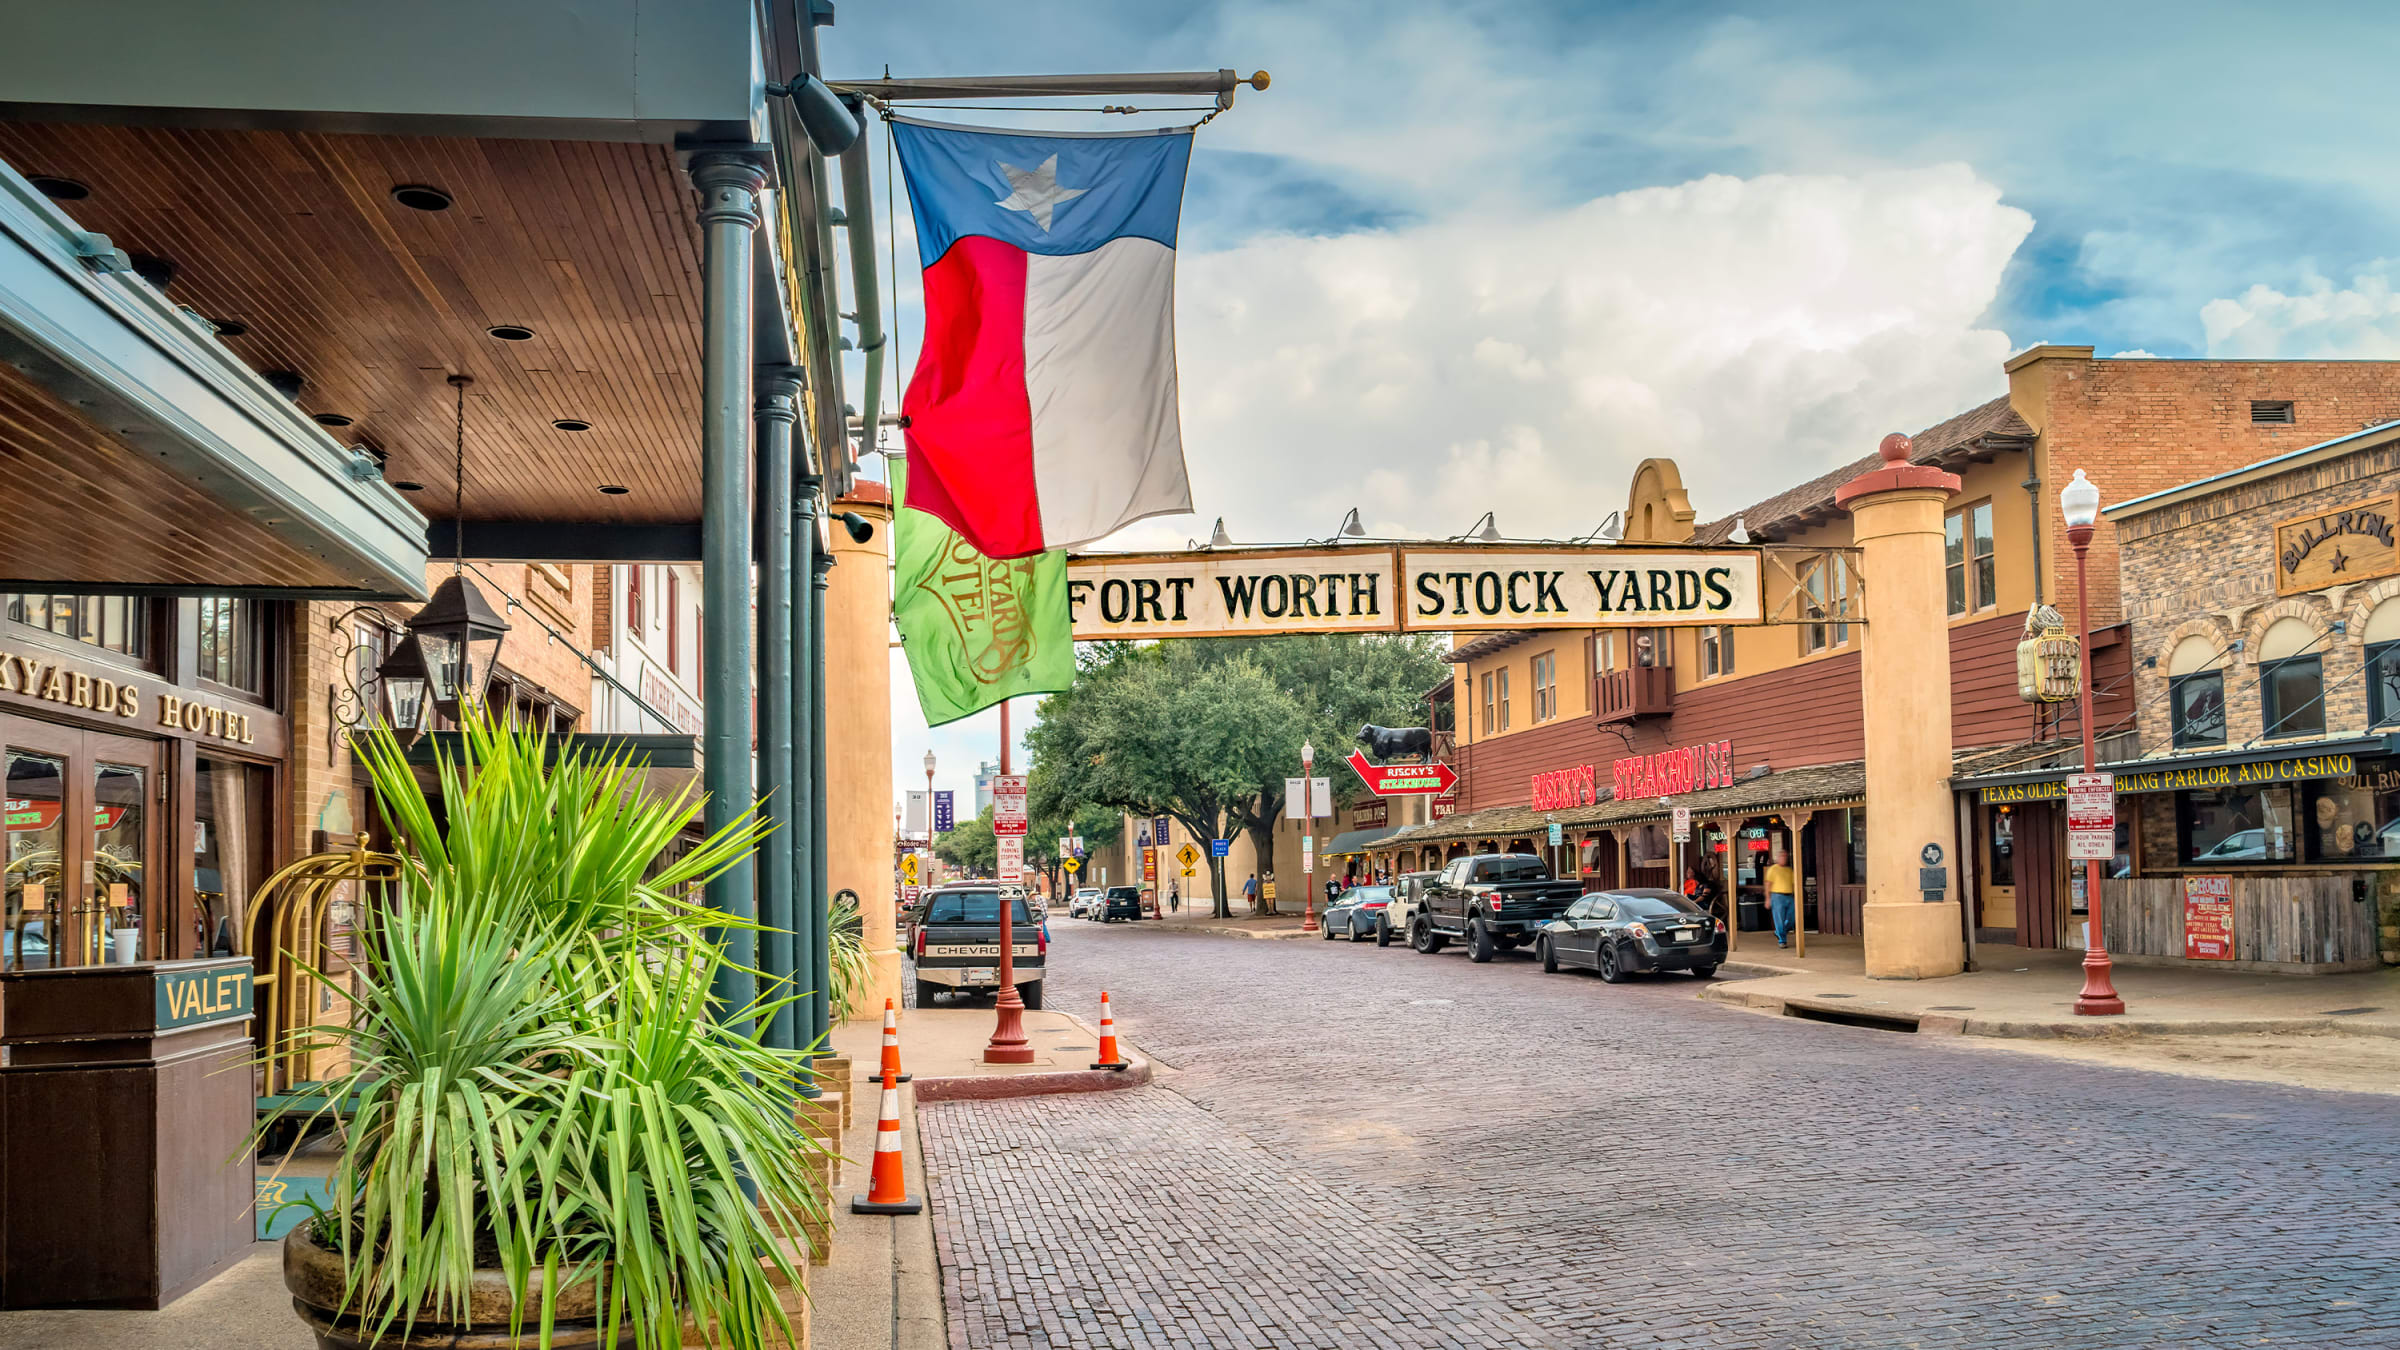 Fort Worth Stock Yards street view.